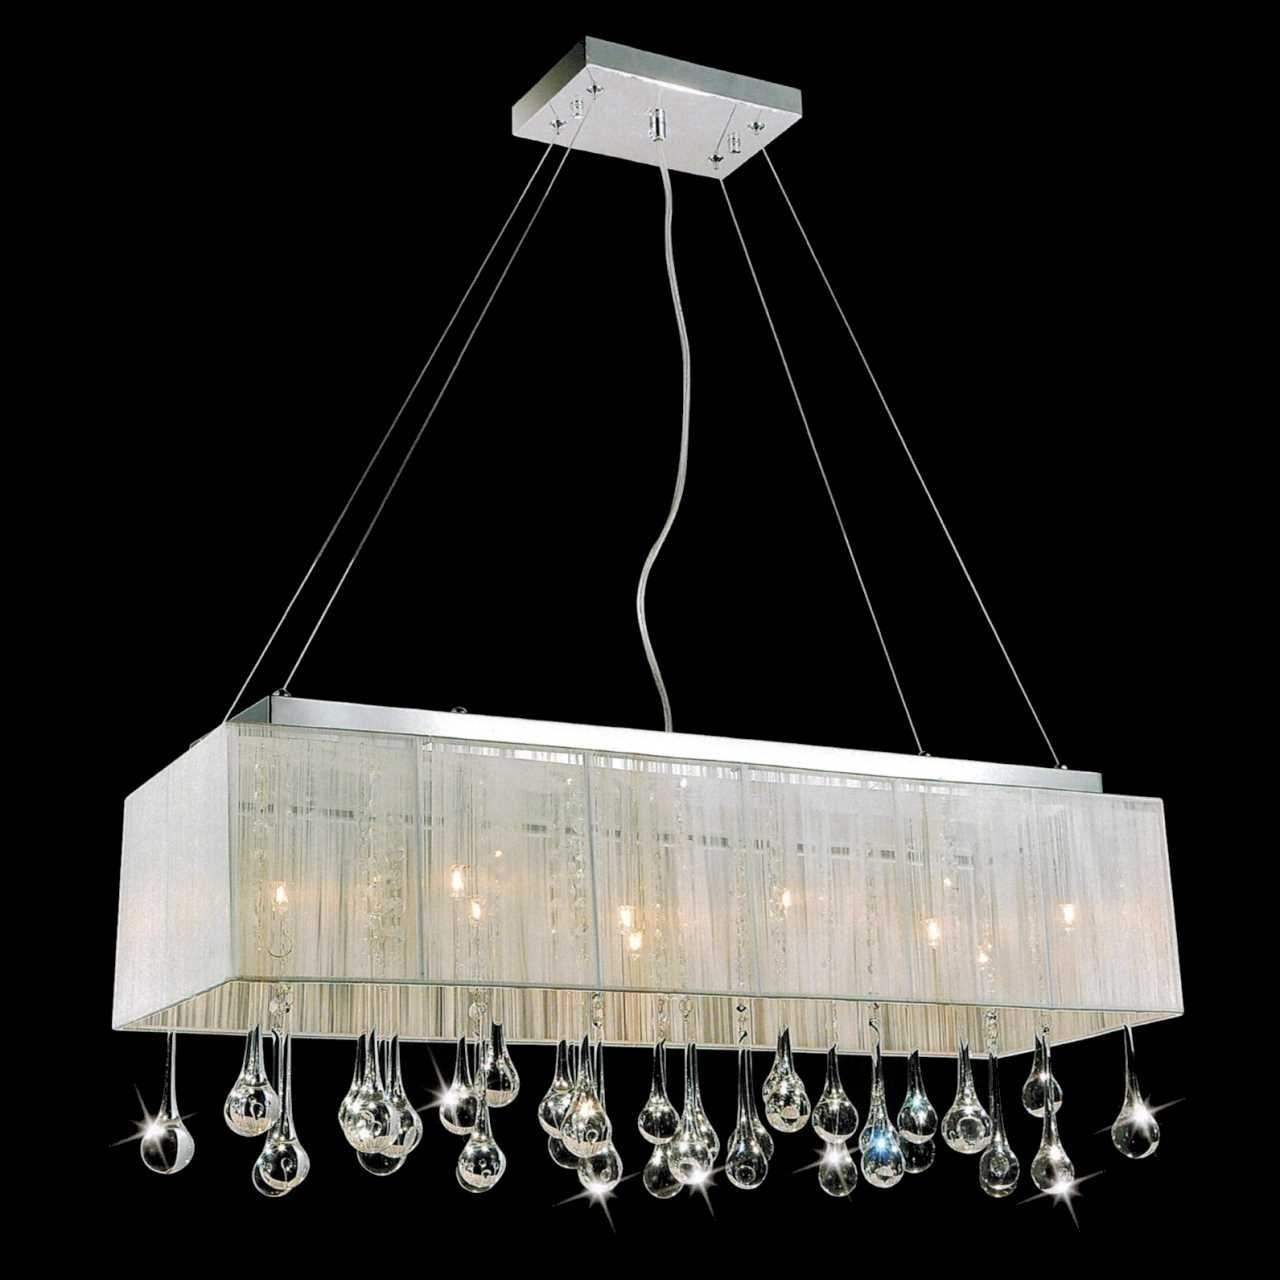 Chandelier Awesome Rectangular Drum Chandelier Terrific Pertaining To Linen Chandeliers (View 7 of 25)